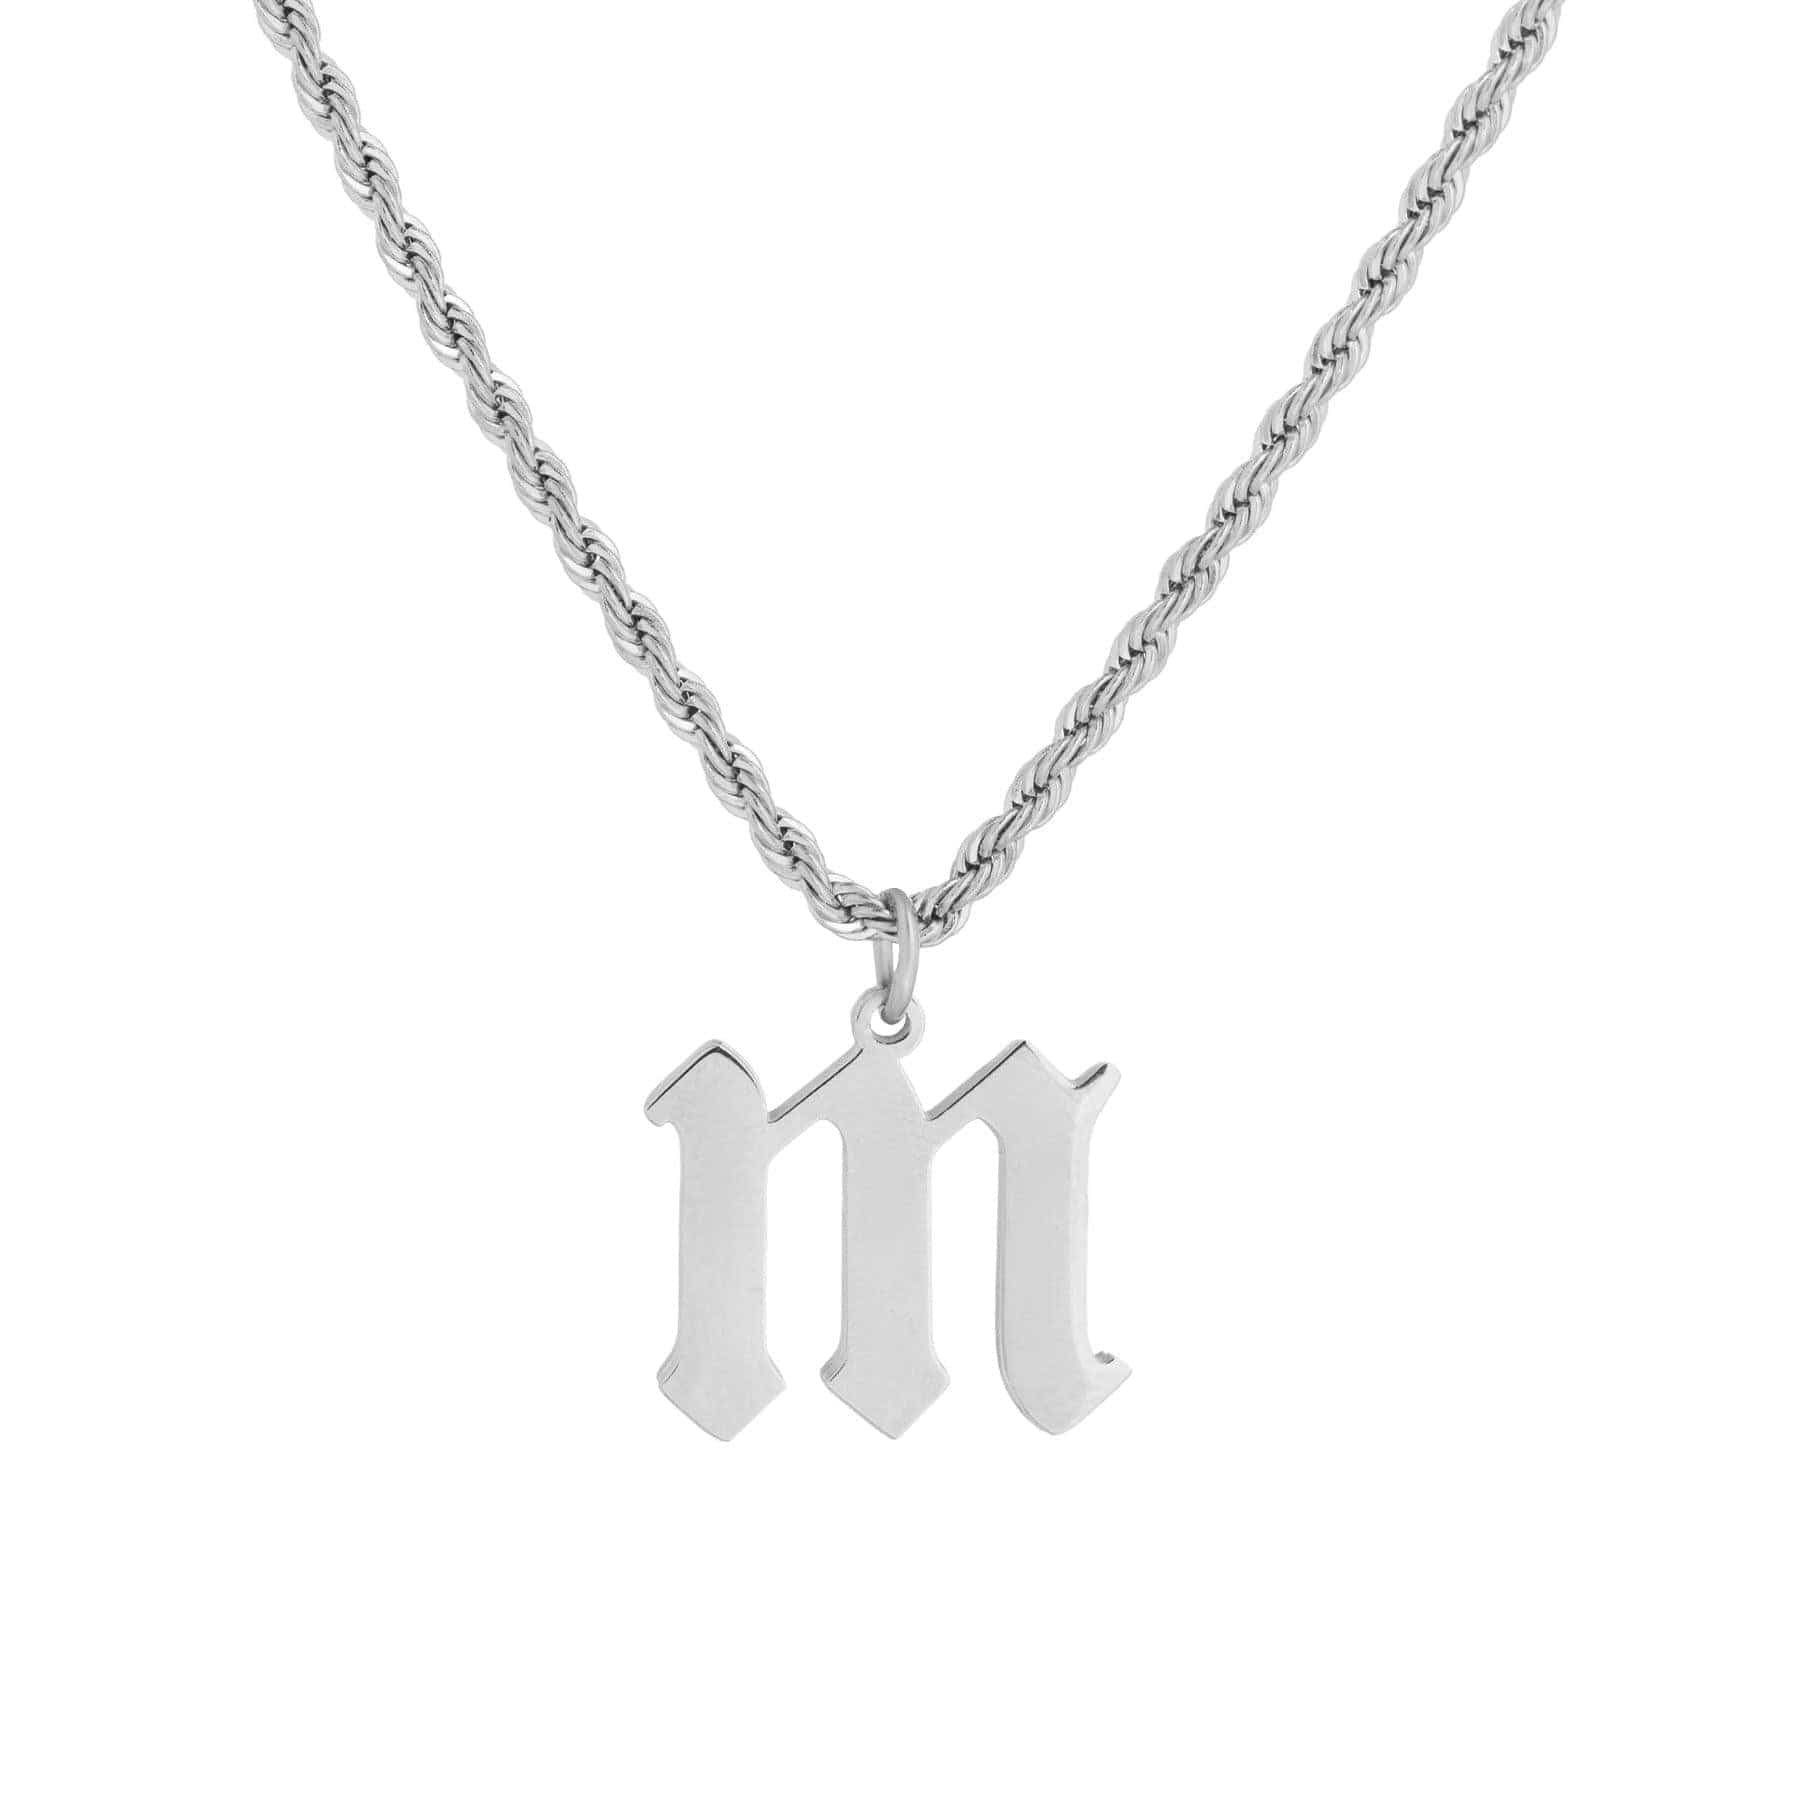 BohoMoon Stainless Steel Marella Lowercase Initial Necklace Silver / A